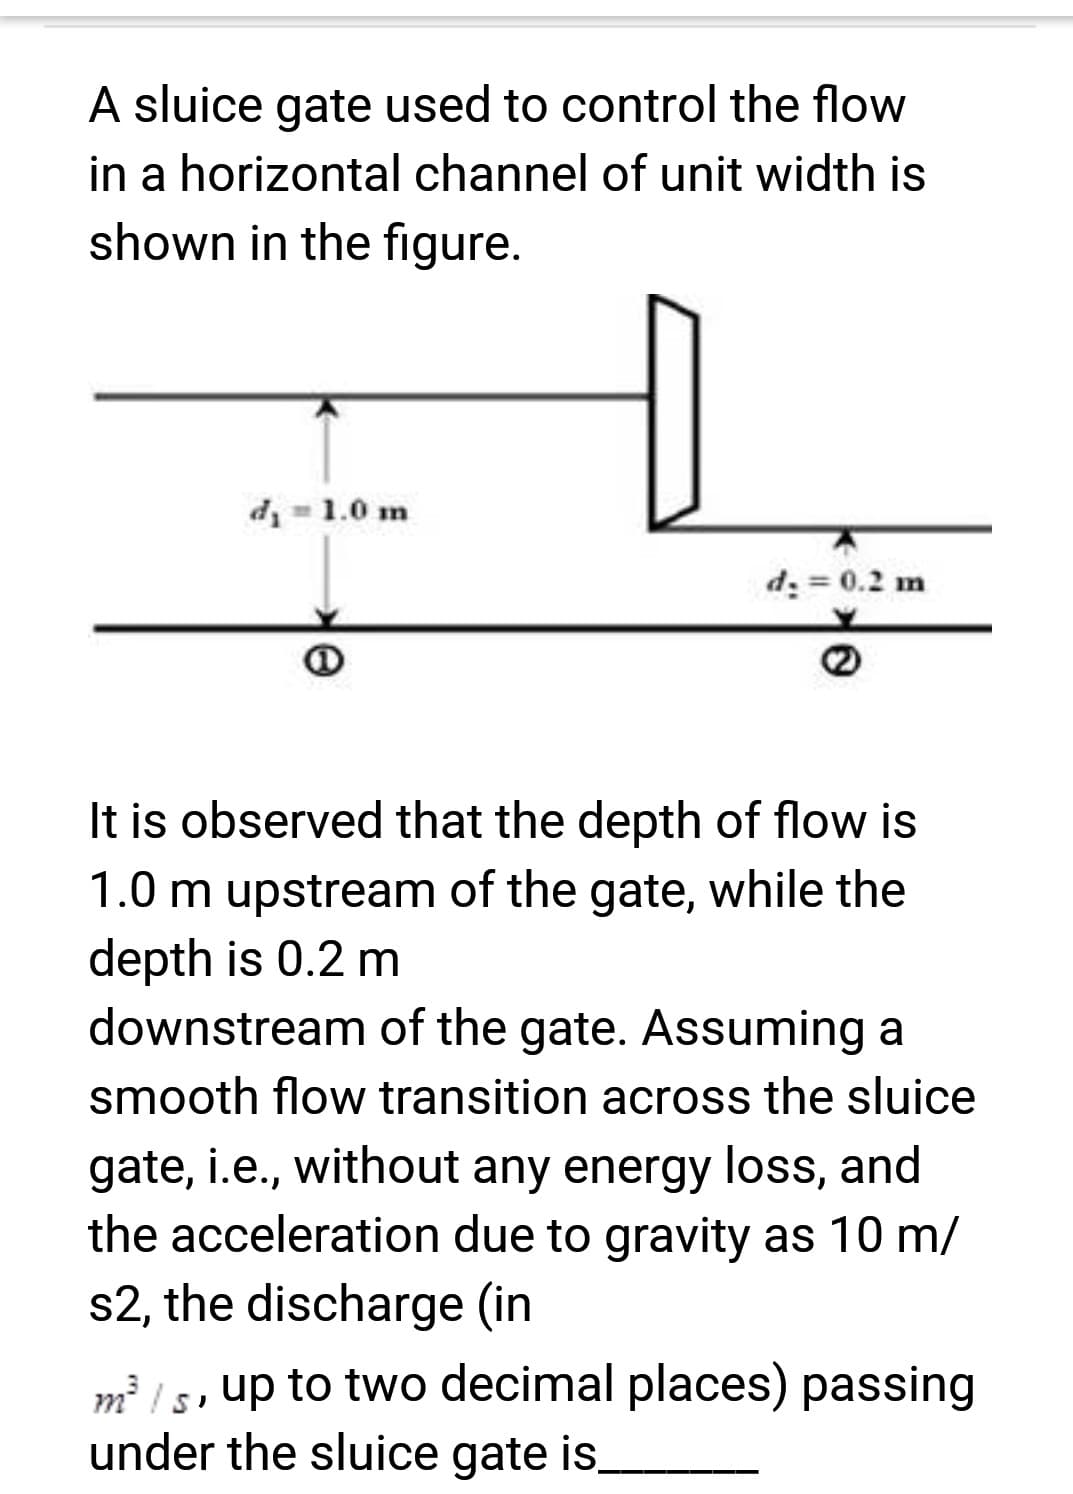 A sluice gate used to control the flow
in a horizontal channel of unit width is
shown in the figure.
d₁ = 1.0 m
D
d₂ = 0.2 m
It is observed that the depth of flow is
1.0 m upstream of the gate, while the
depth is 0.2 m
downstream of the gate. Assuming a
smooth flow transition across the sluice
gate, i.e., without any energy loss, and
the acceleration due to gravity as 10 m/
s2, the discharge (in
3
m³/s, up to two decimal places) passing
under the sluice gate is,